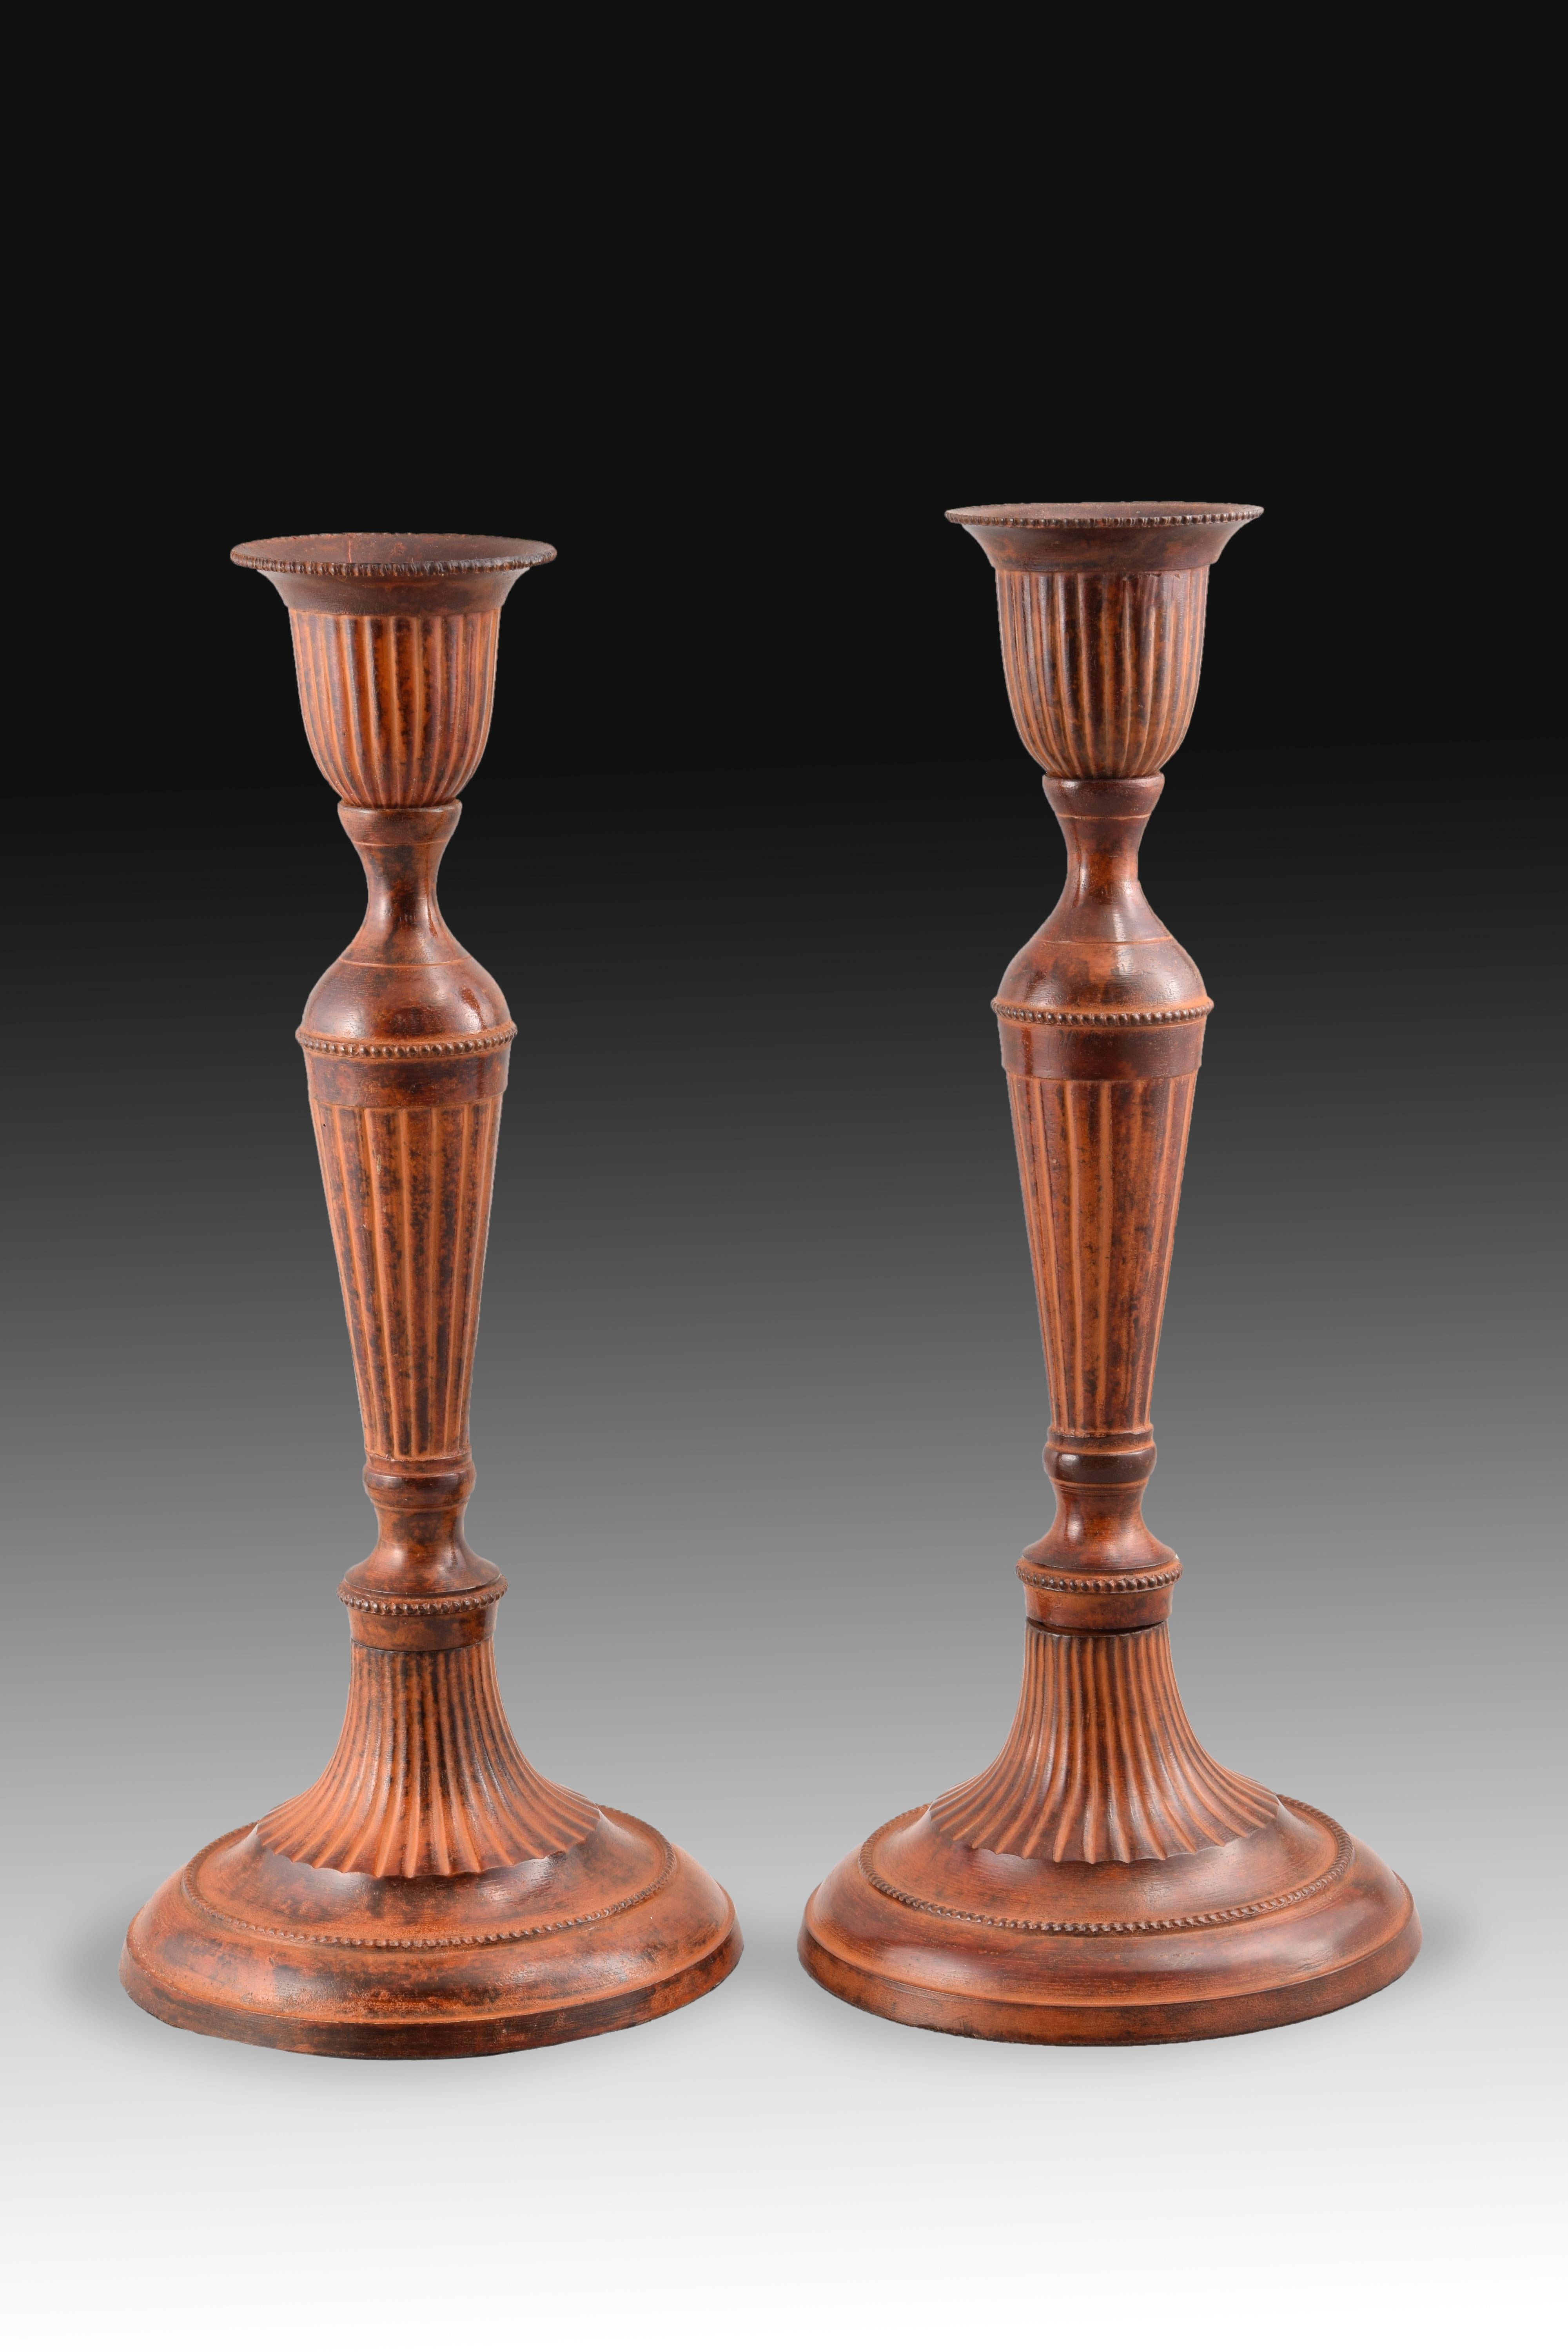 Pair of candlestick in patinated bronze.
The circular base shows a decoration based onmoldings and grooves, the latter element that is repeated by the barrel, which has been shaped into a circular stipe, and the vase that serves as the base for the